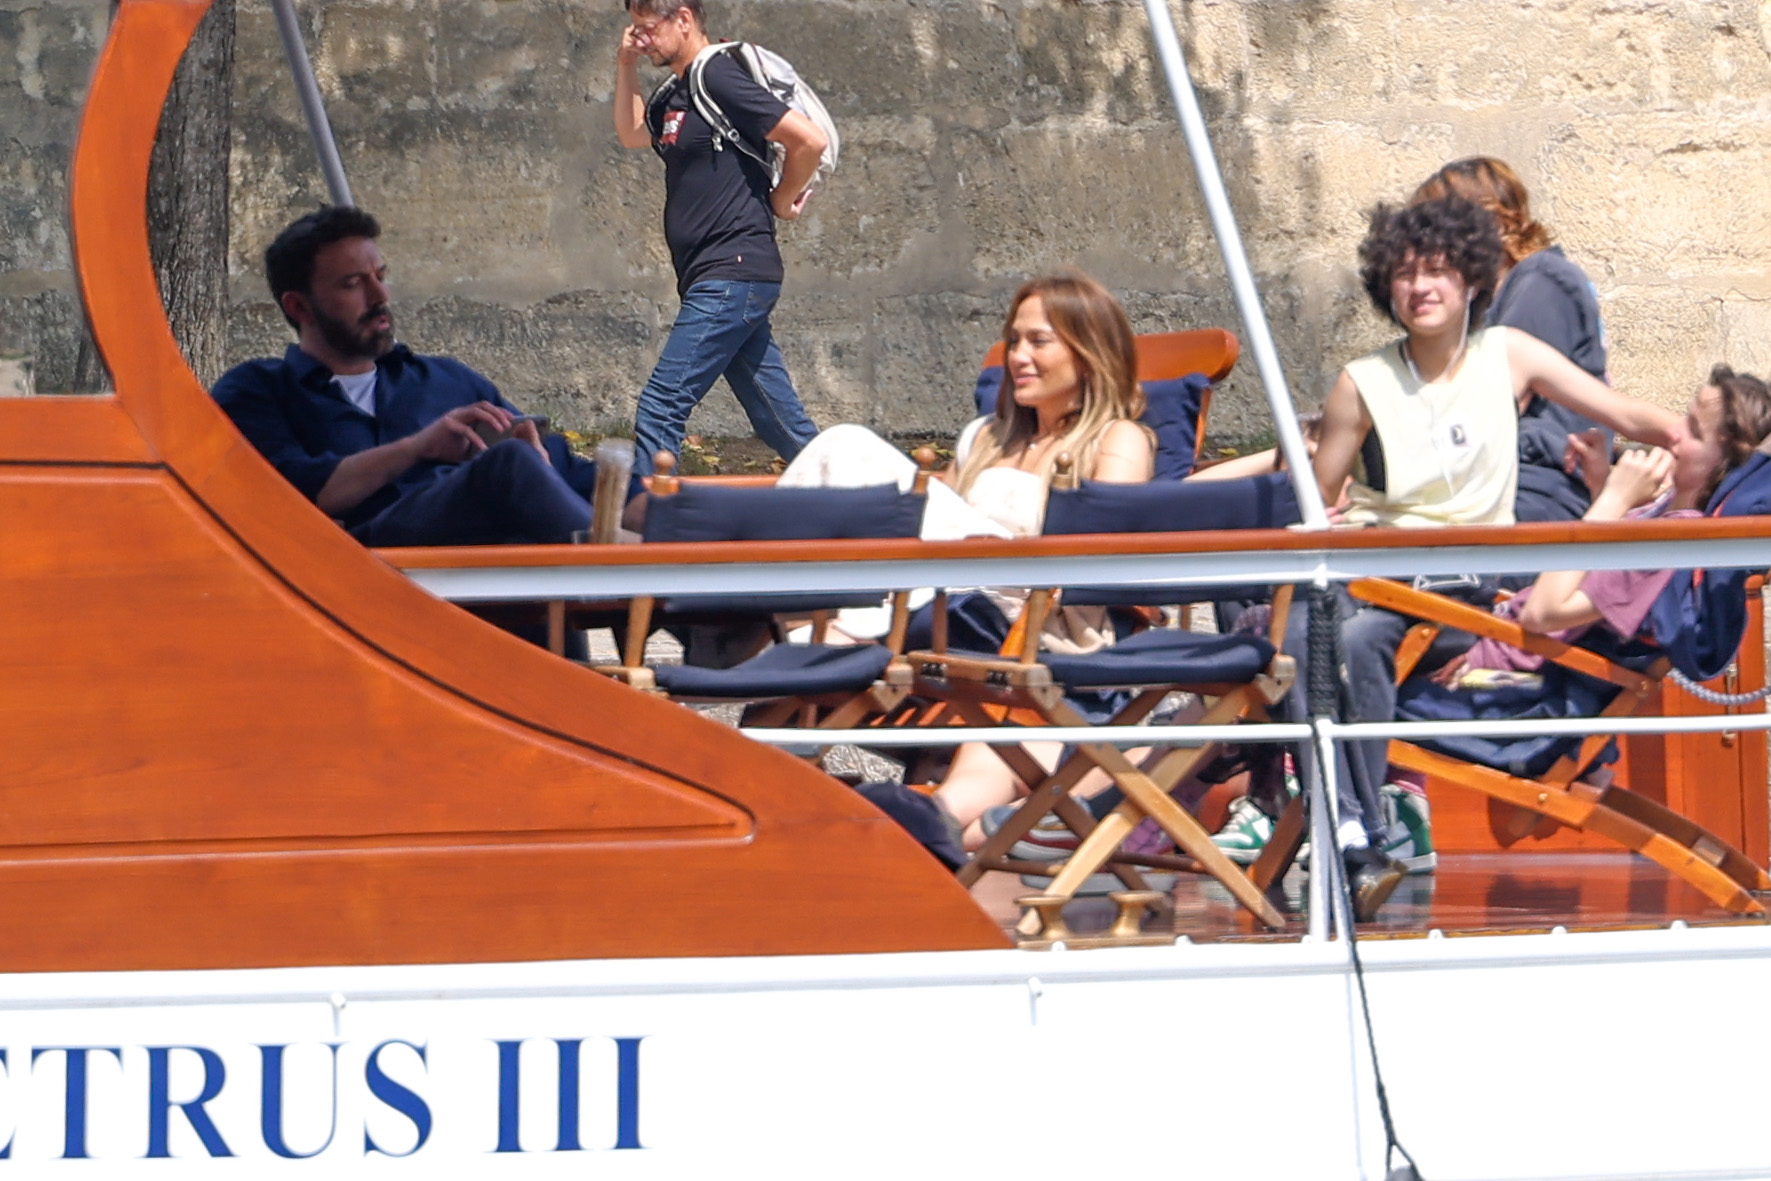 Ben Affleck, Seraphina Affleck, Emme Muniz, and Jennifer Lopez on a cruise on the River Seine in July 2022 in Paris, France | Source: Getty Images